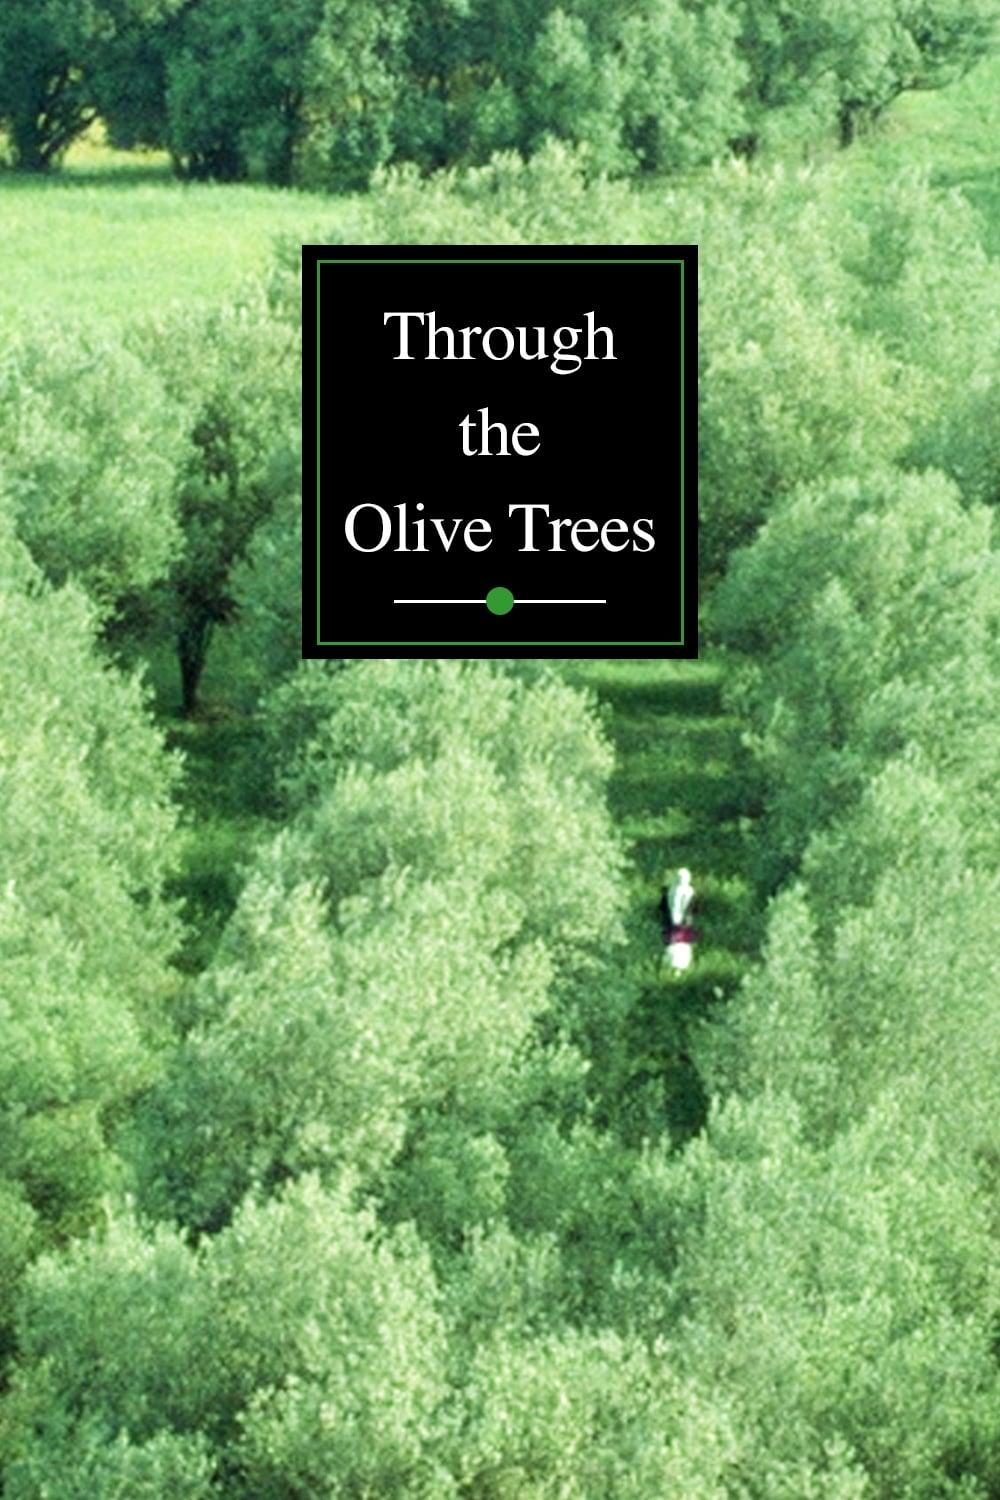 Through the Olive Trees poster